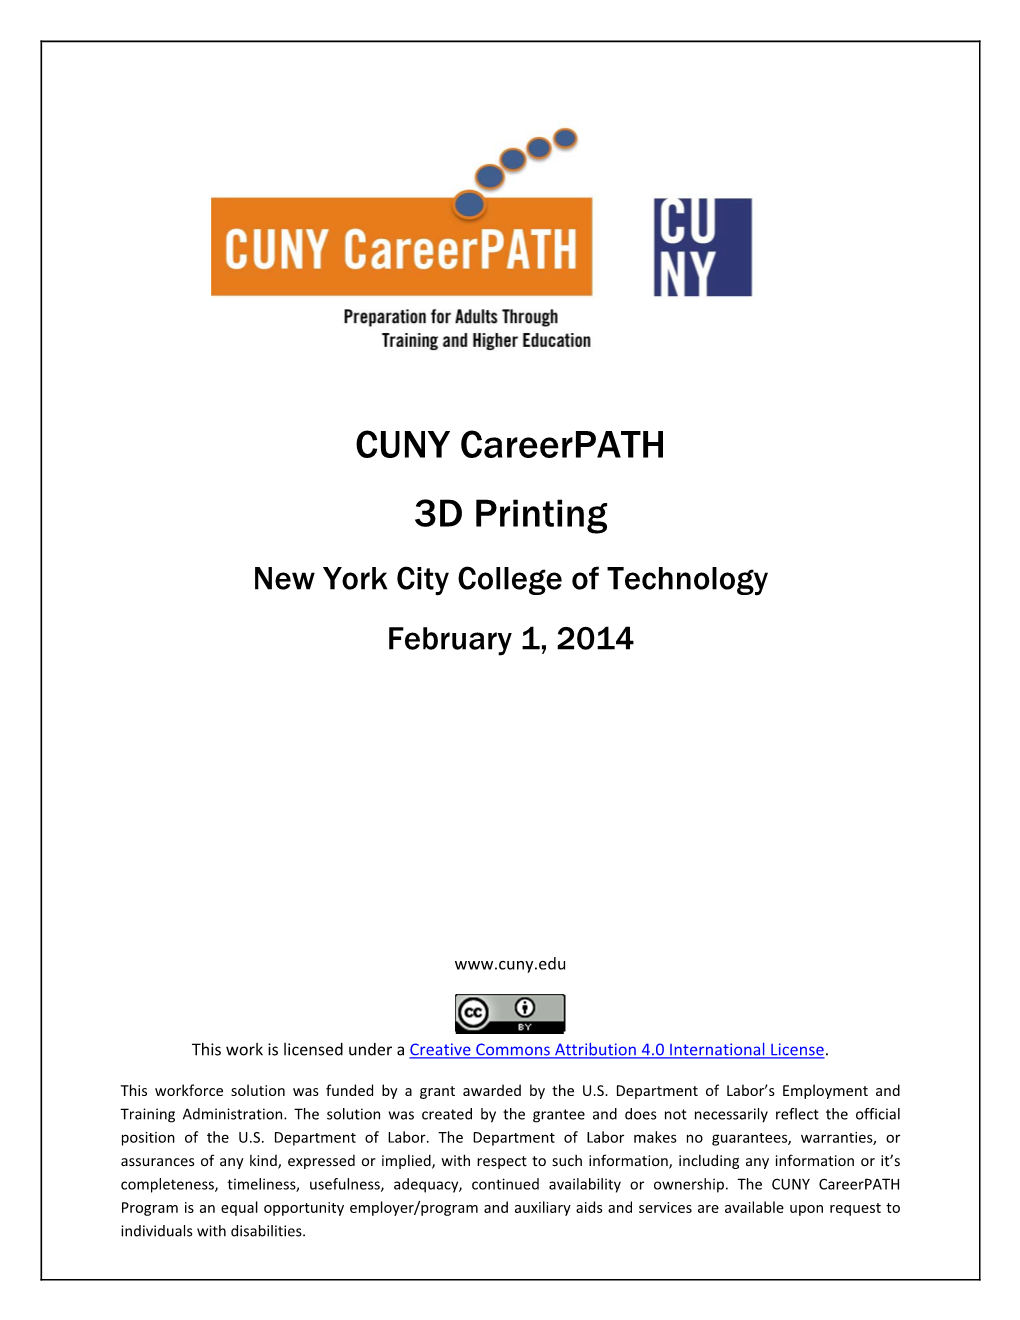 CUNY Careerpath 3D Printing New York City College of Technology February 1, 2014